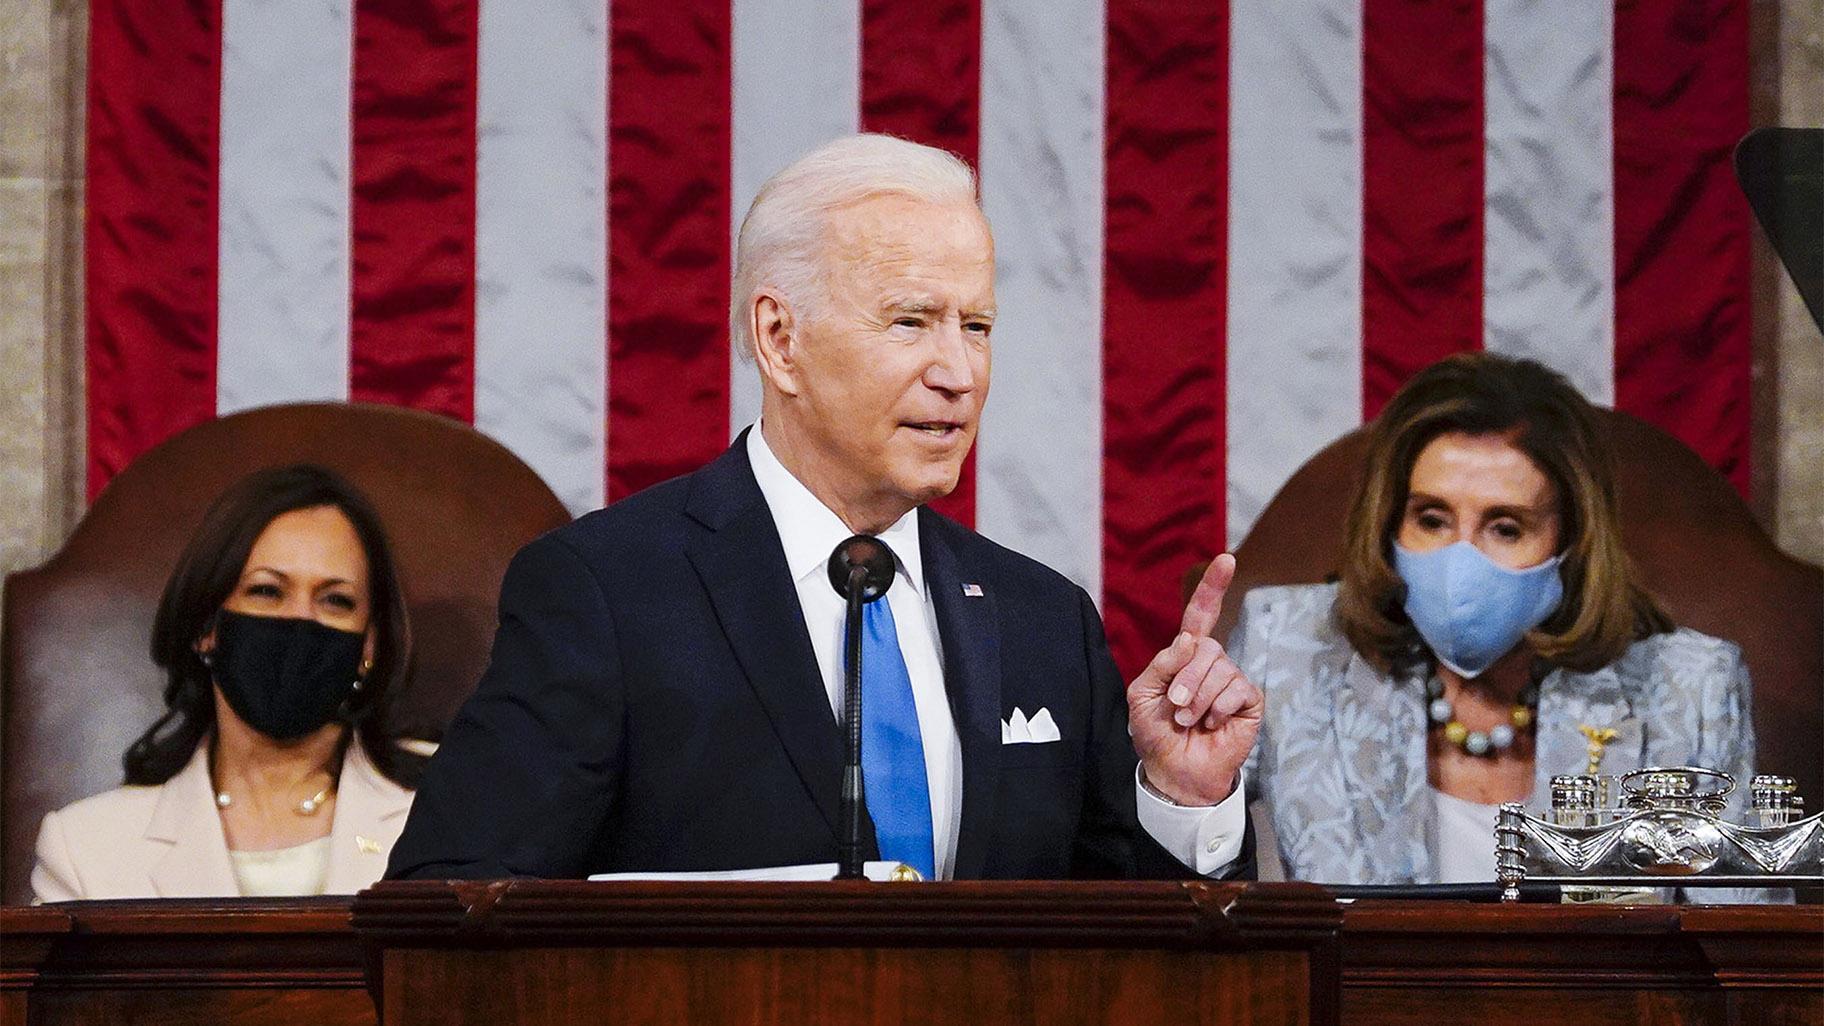 FILE - In this April 28, 2021, file photo President Joe Biden addresses a joint session of Congress in the House Chamber at the U.S. Capitol in Washington, as Vice President Kamala Harris, left, and House Speaker Nancy Pelosi of Calif., look on.  (Melina Mara / The Washington Post via AP, Pool)